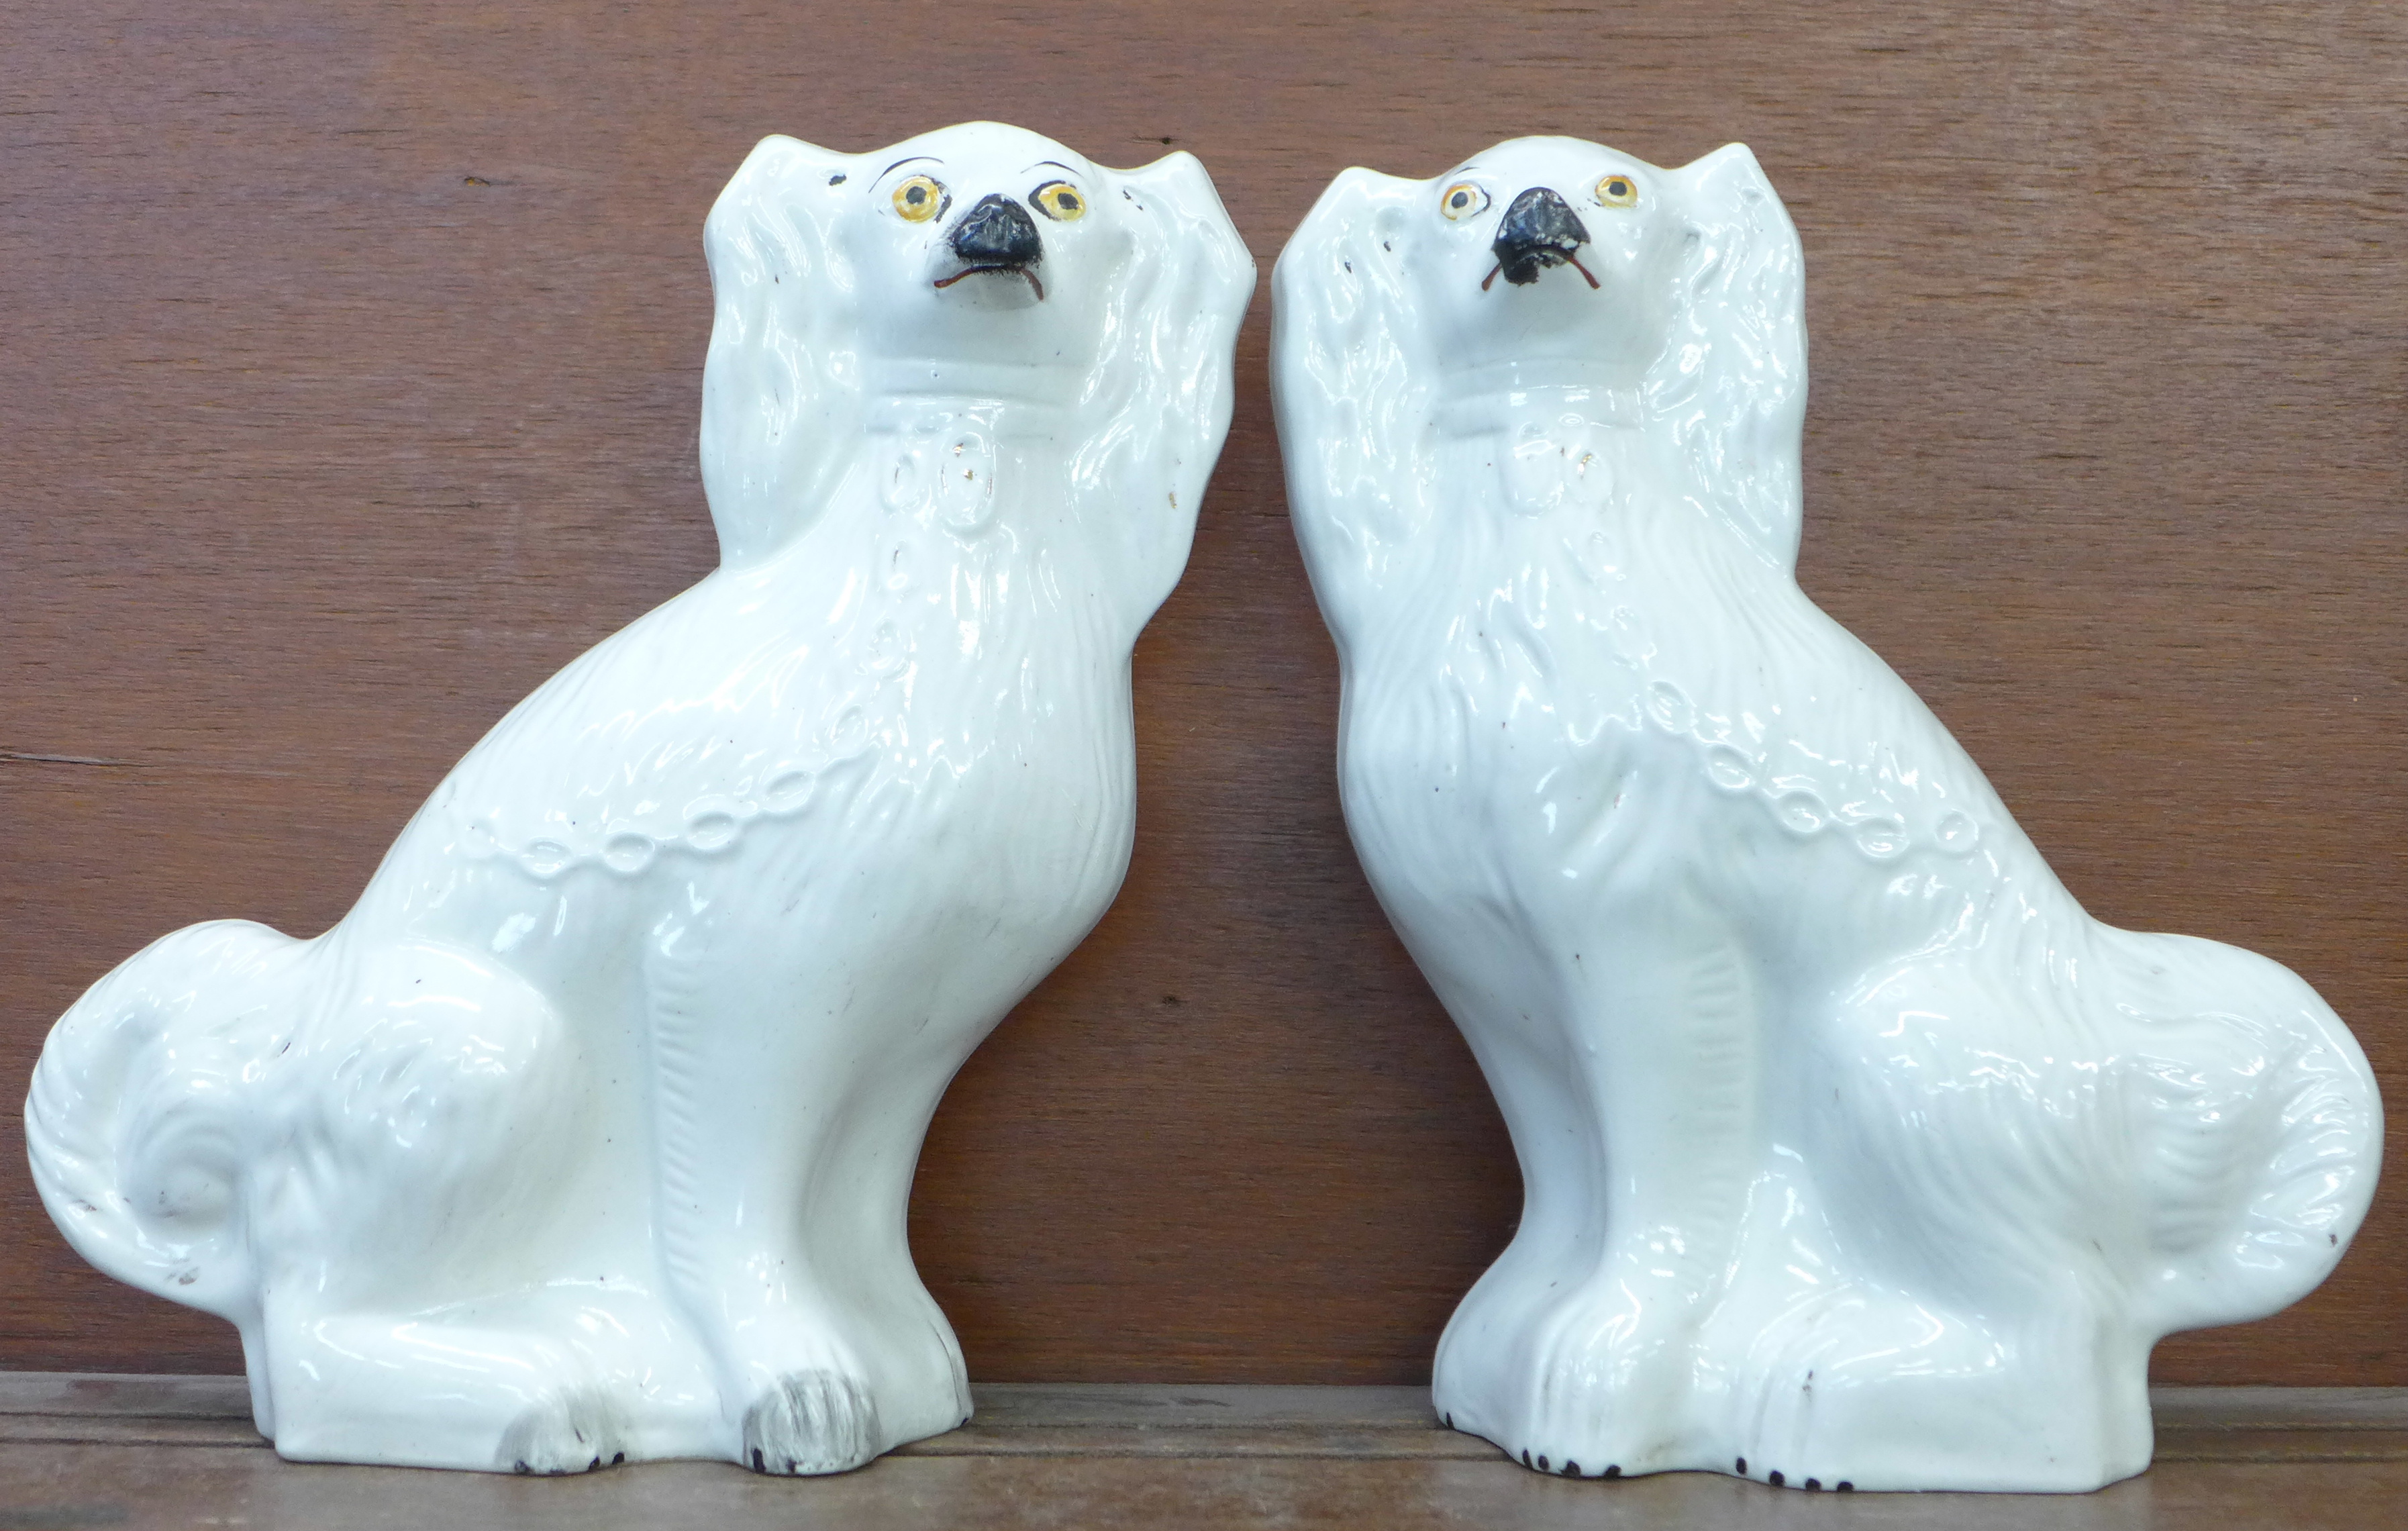 A pair of Staffordshire dogs, 29cm